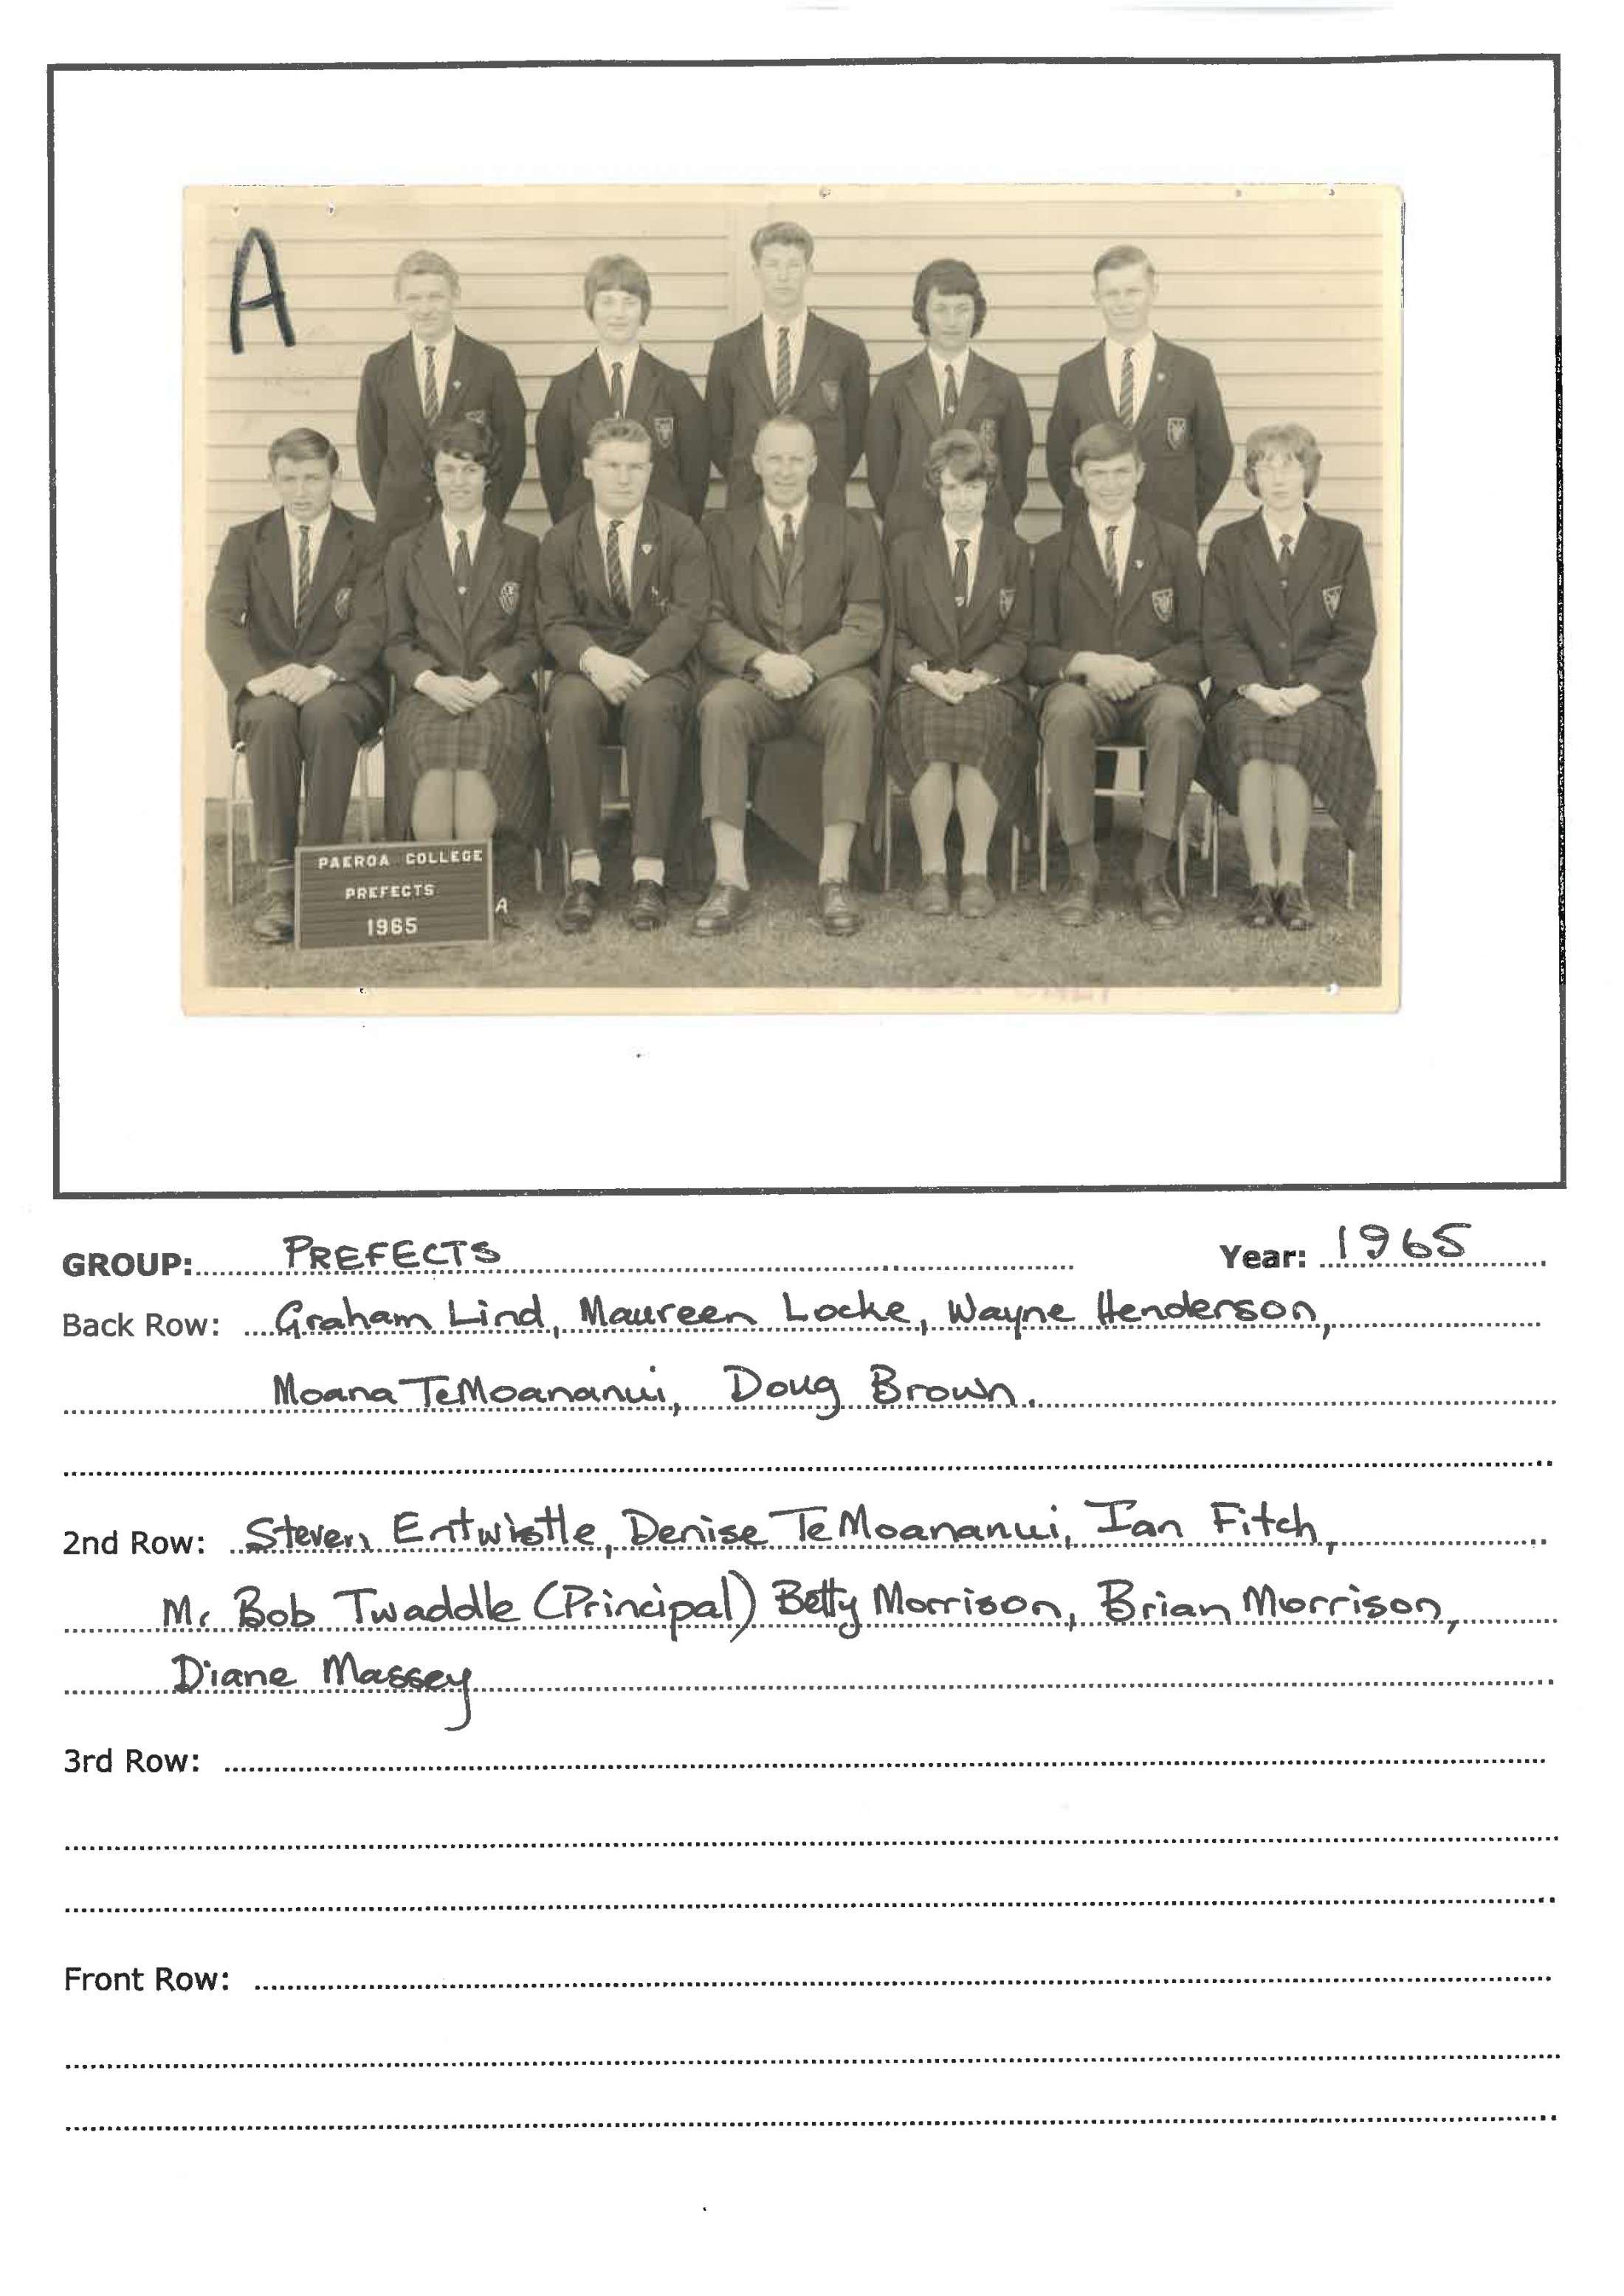 1965 Prefects